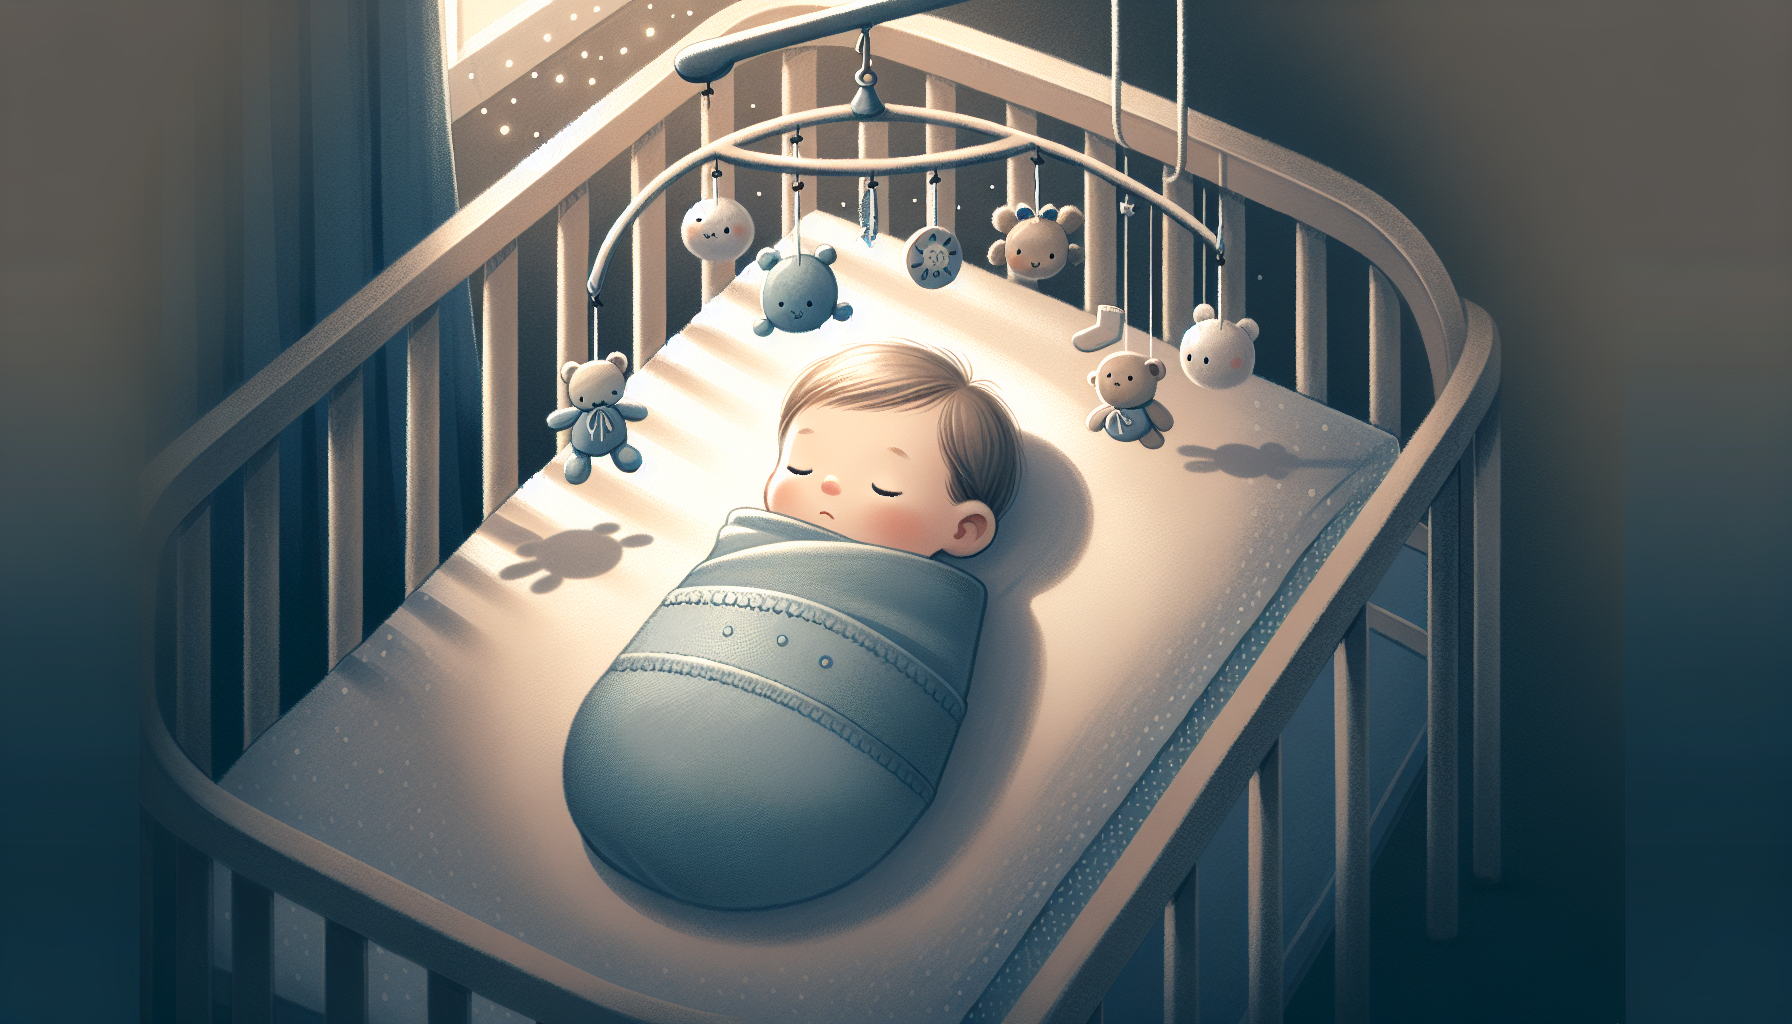 Illustration of a baby using a sleep sack for bedtime